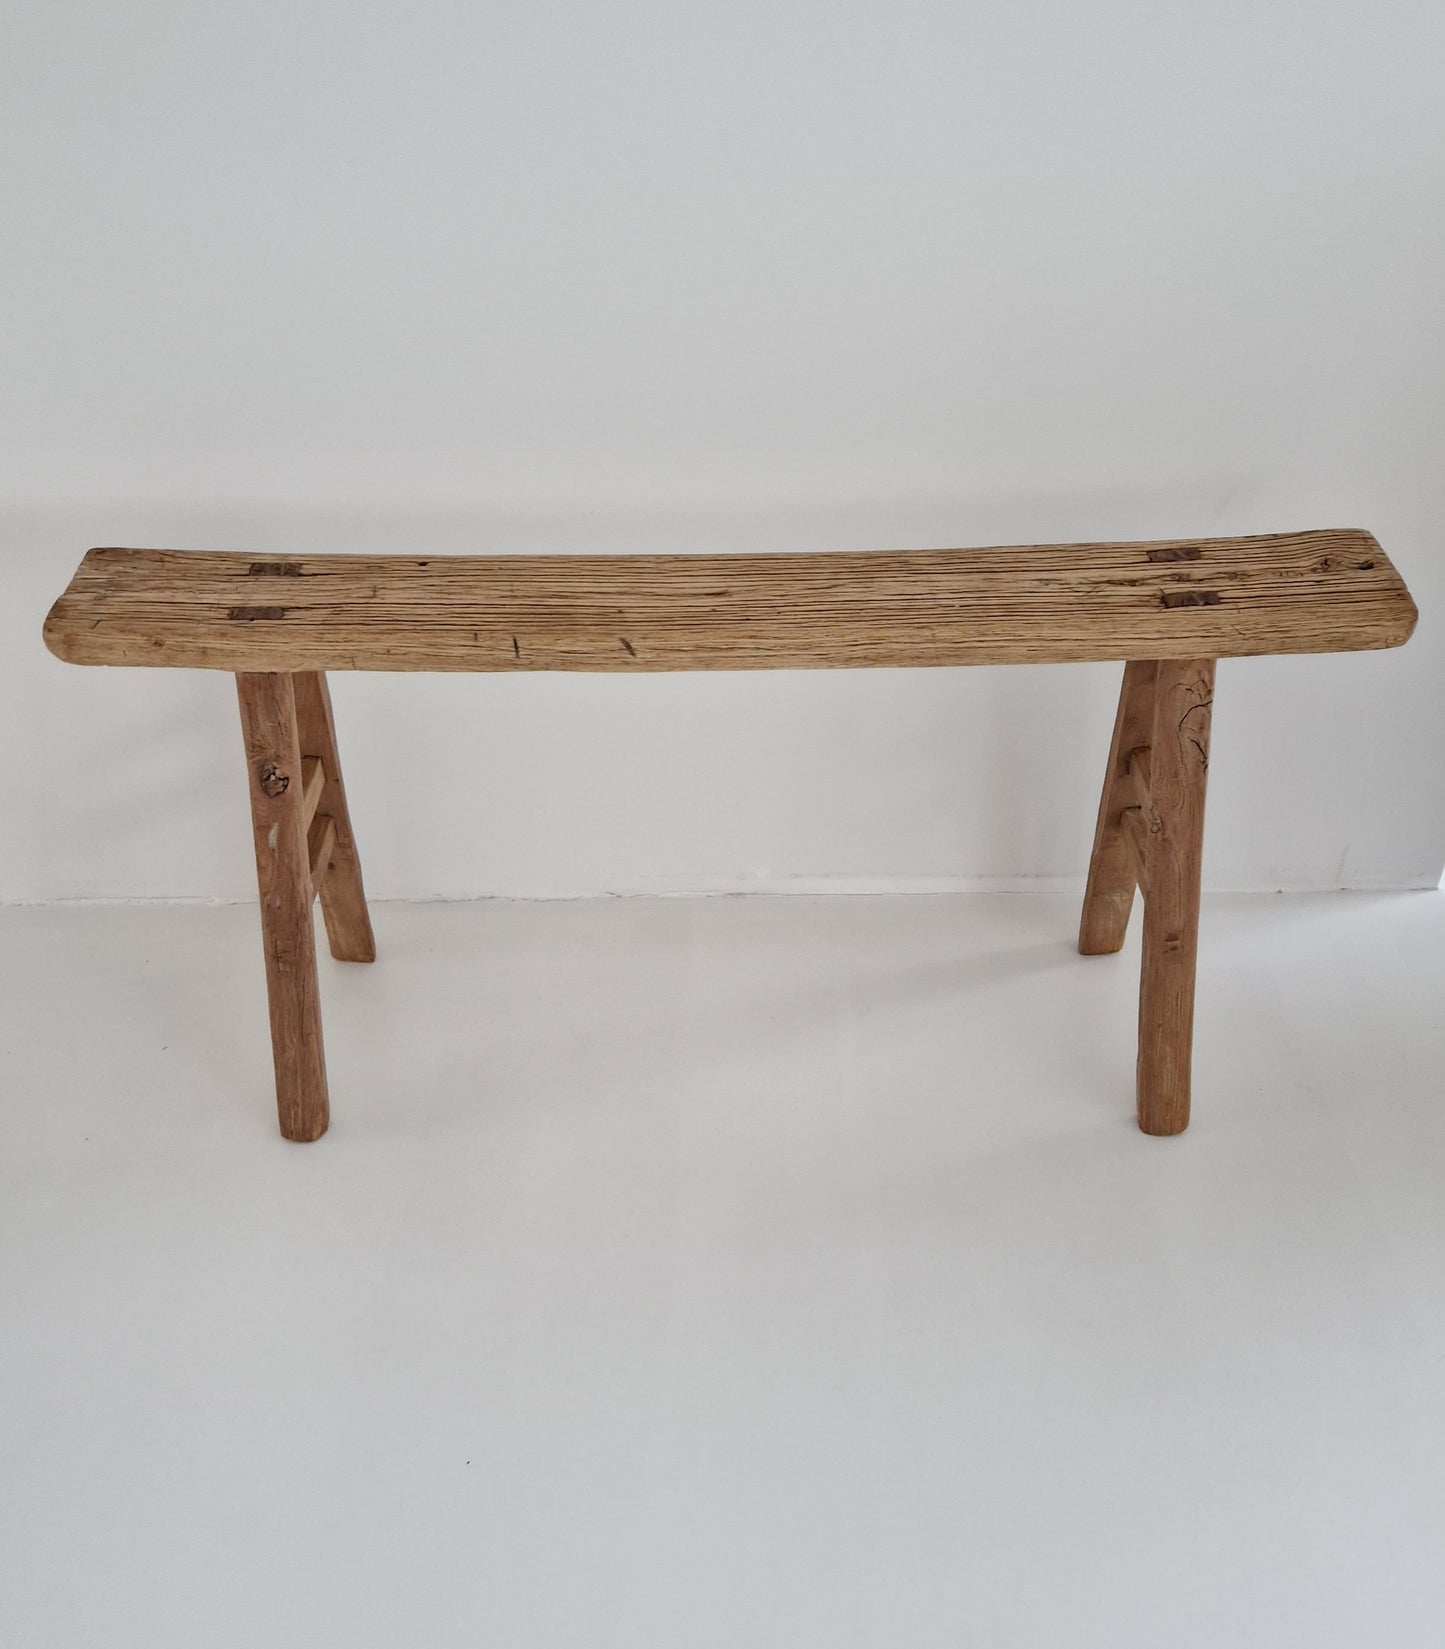 Old wooden bench #9 (114,5cm)